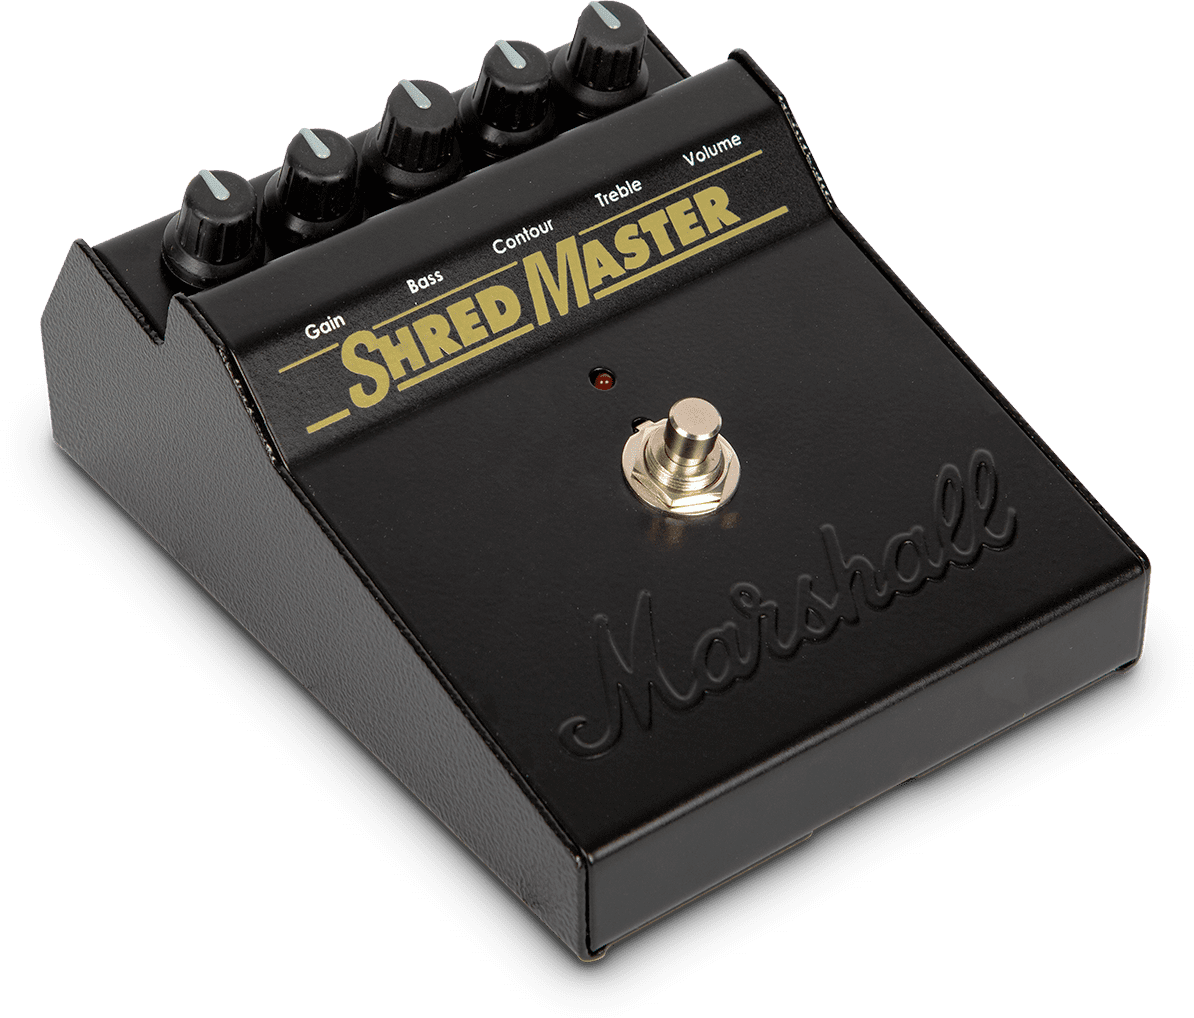 Marshall Shredmaster 60th Anniversary - Overdrive, distortion & fuzz effect pedal - Main picture